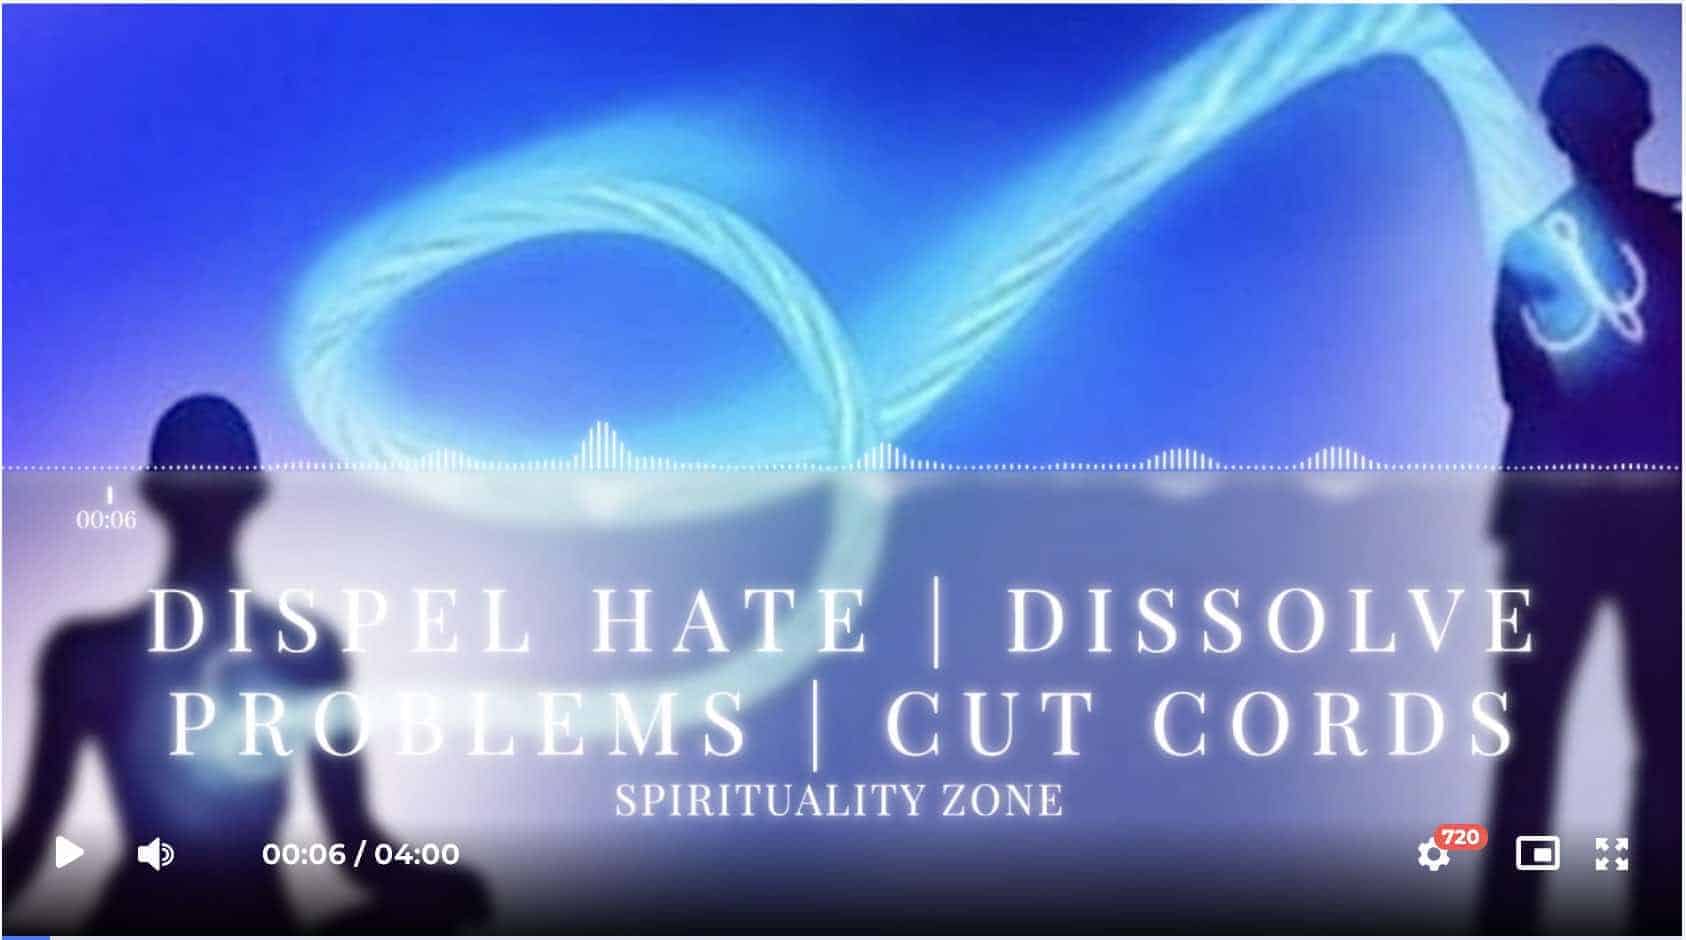 Dispel and Neutralise Hate | Dissolve Problems | Cut cords